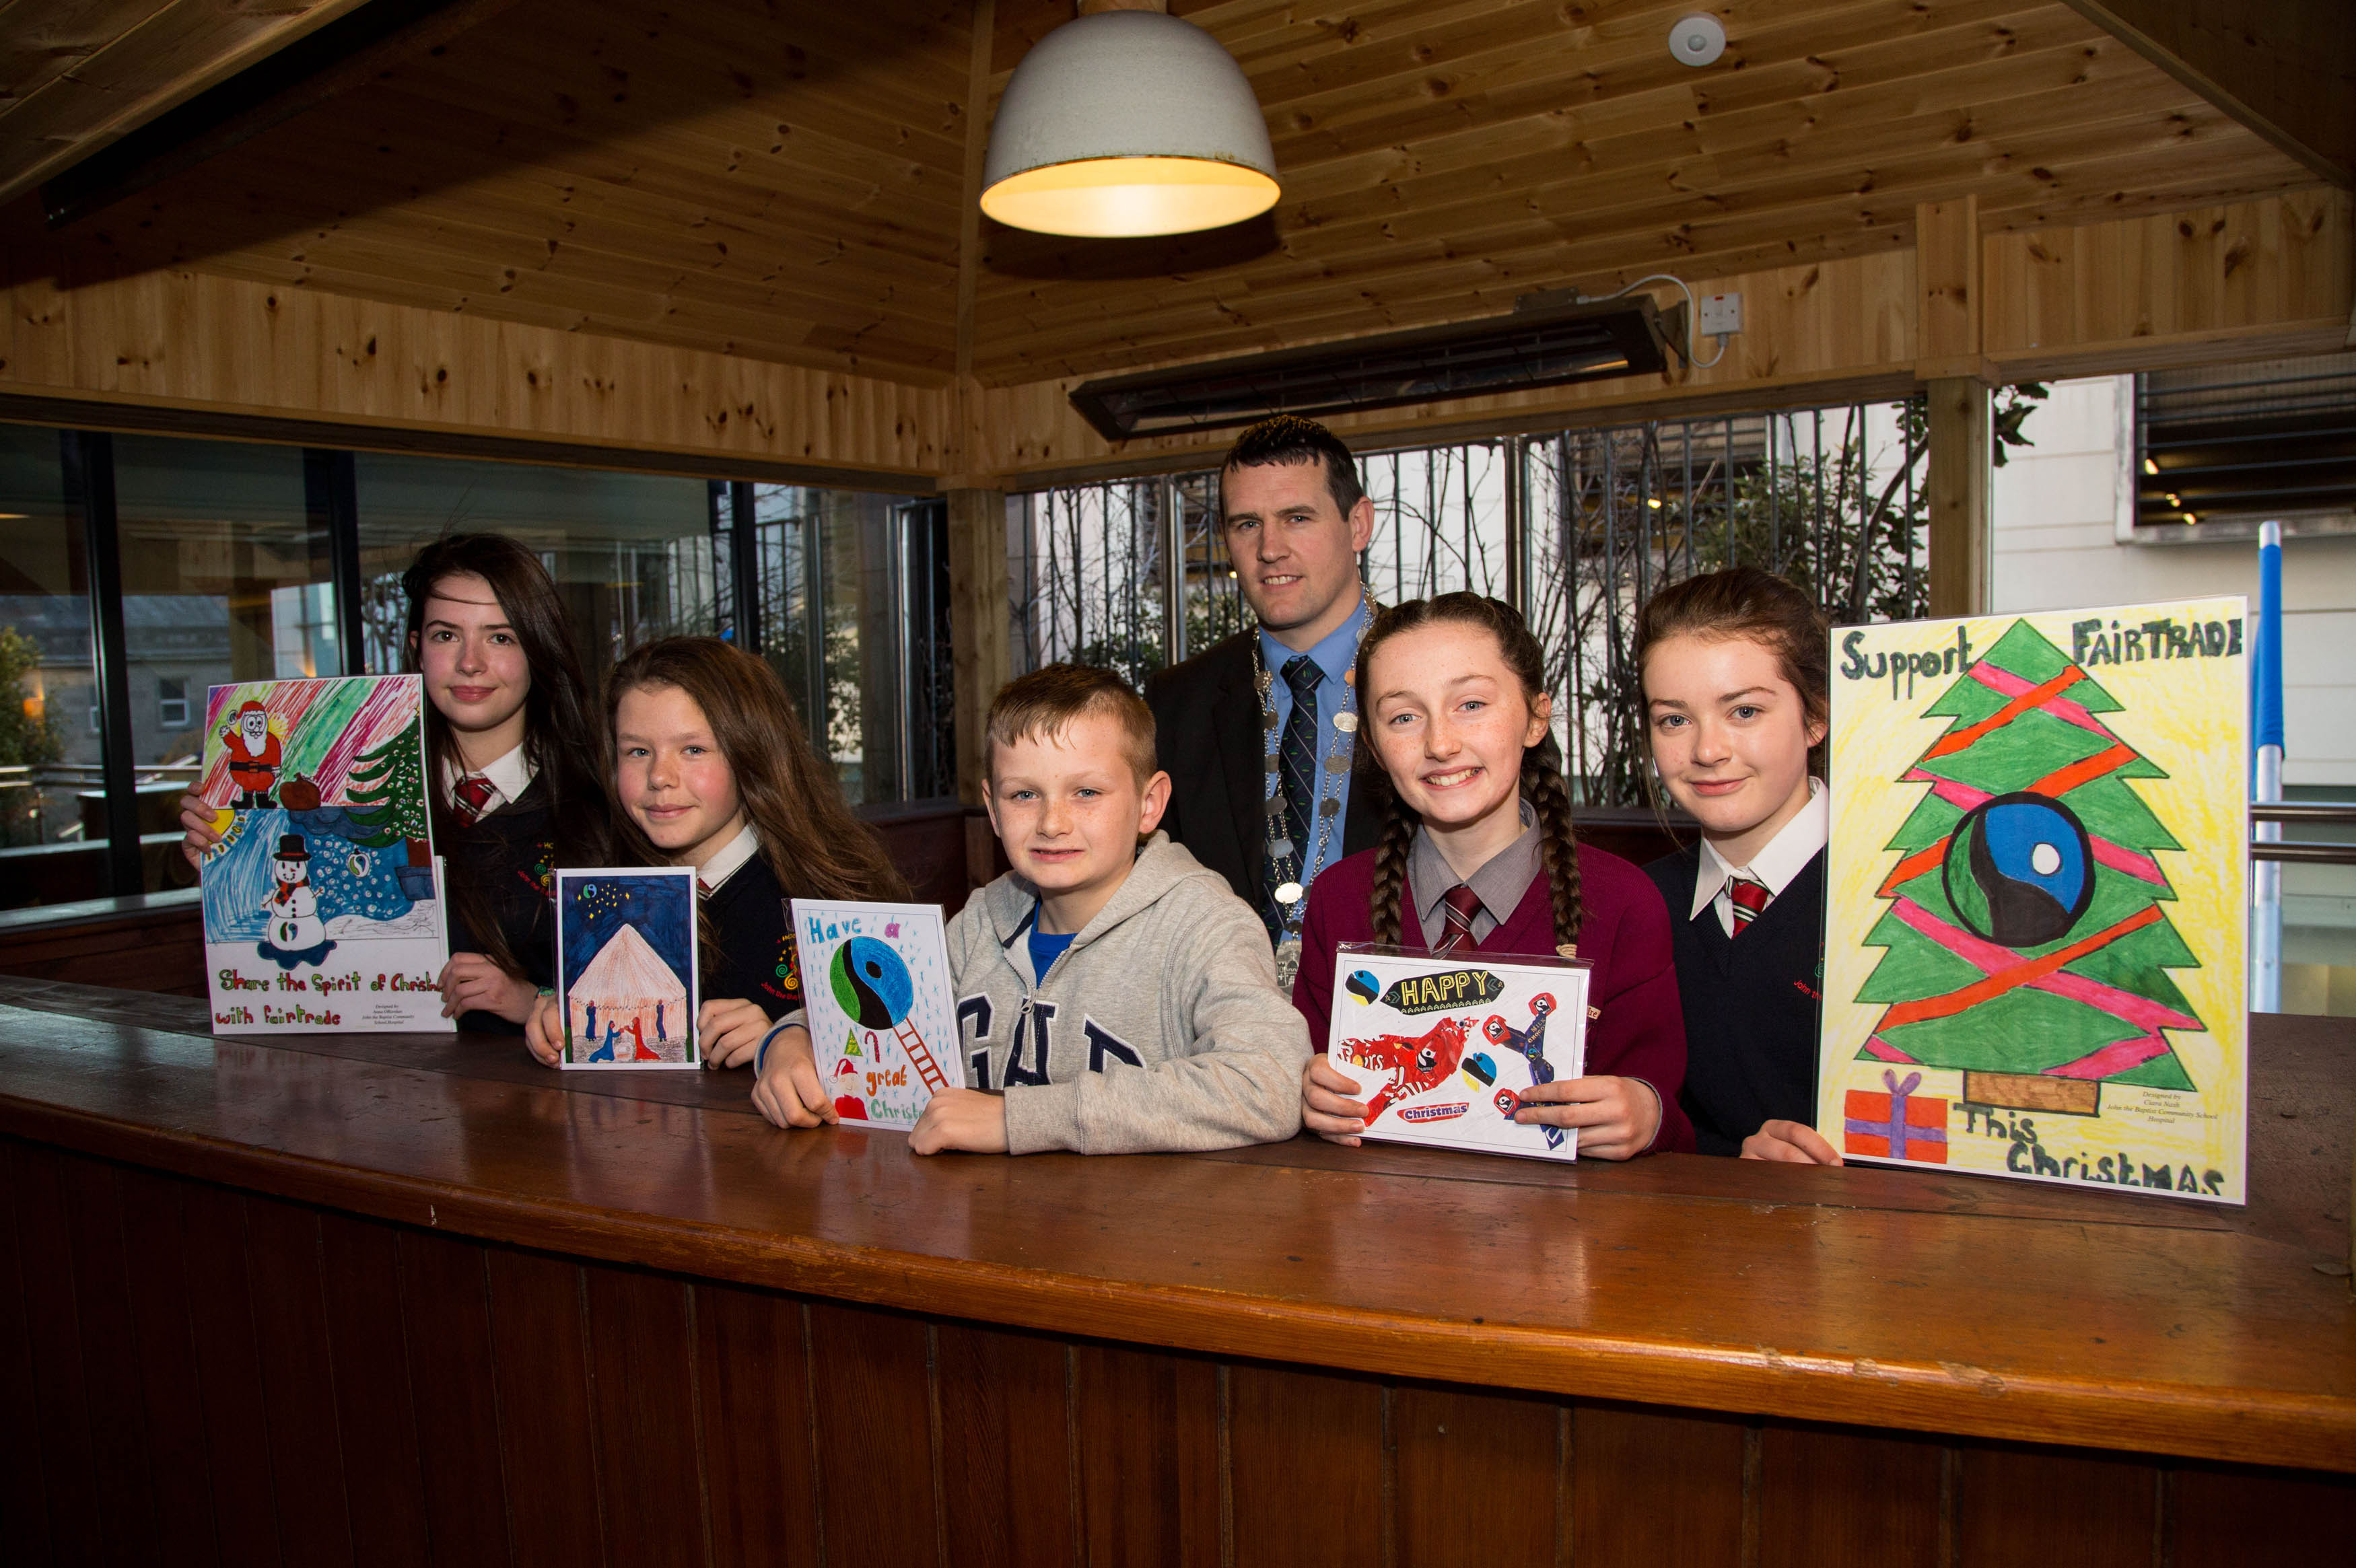 Limerick City Fairtrade Christmas Card Competition 2016